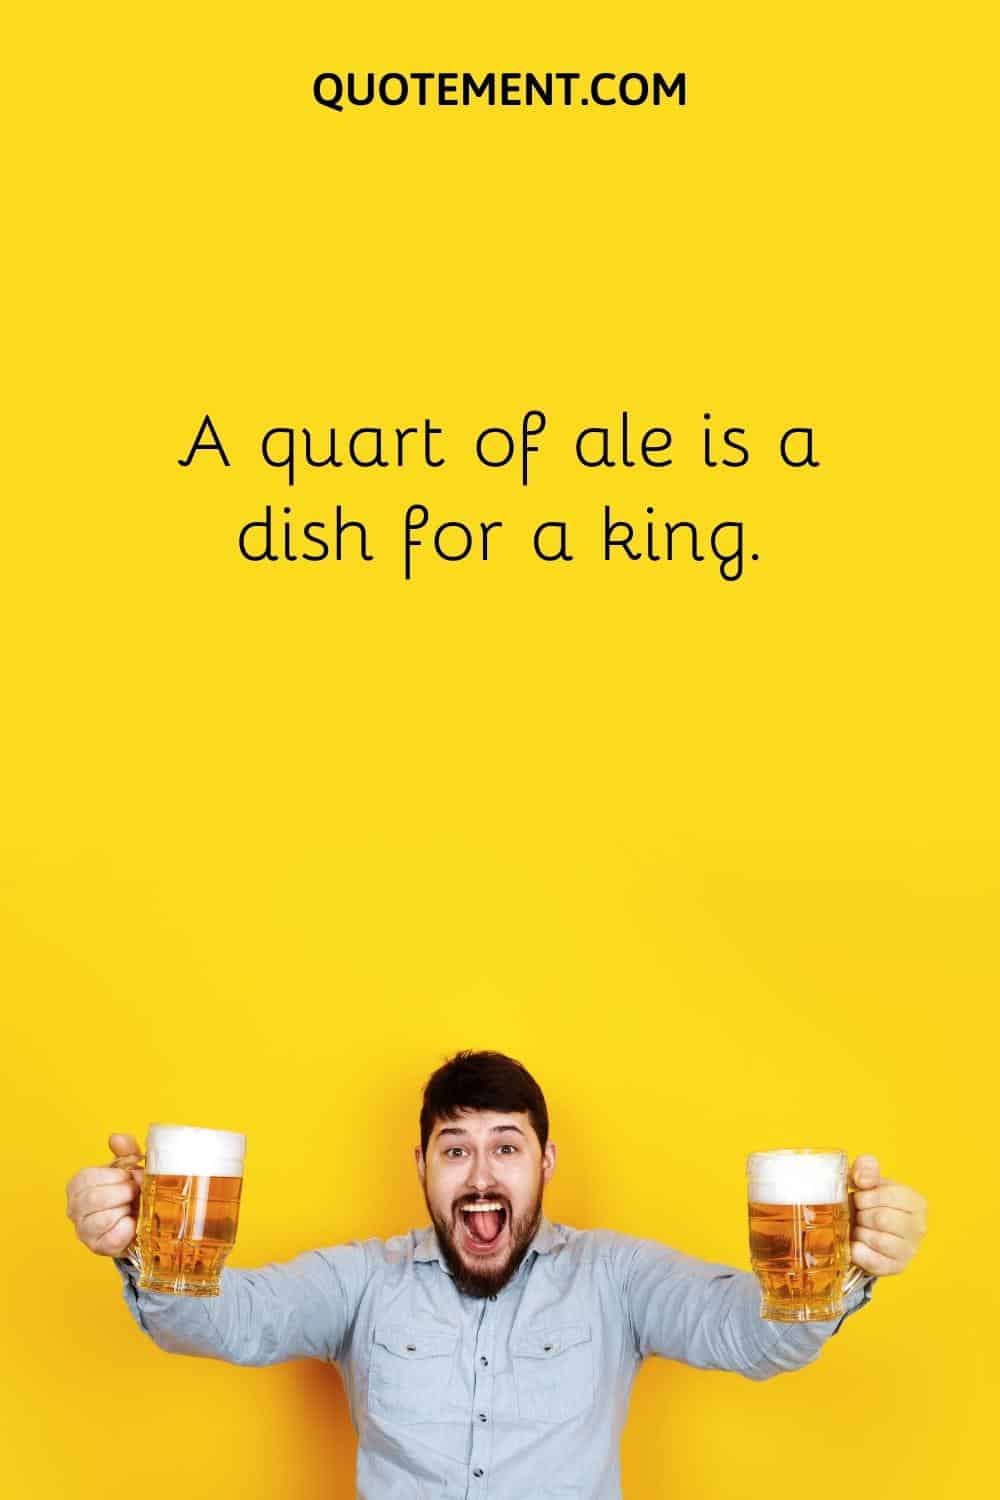 A quart of ale is a dish for a king.